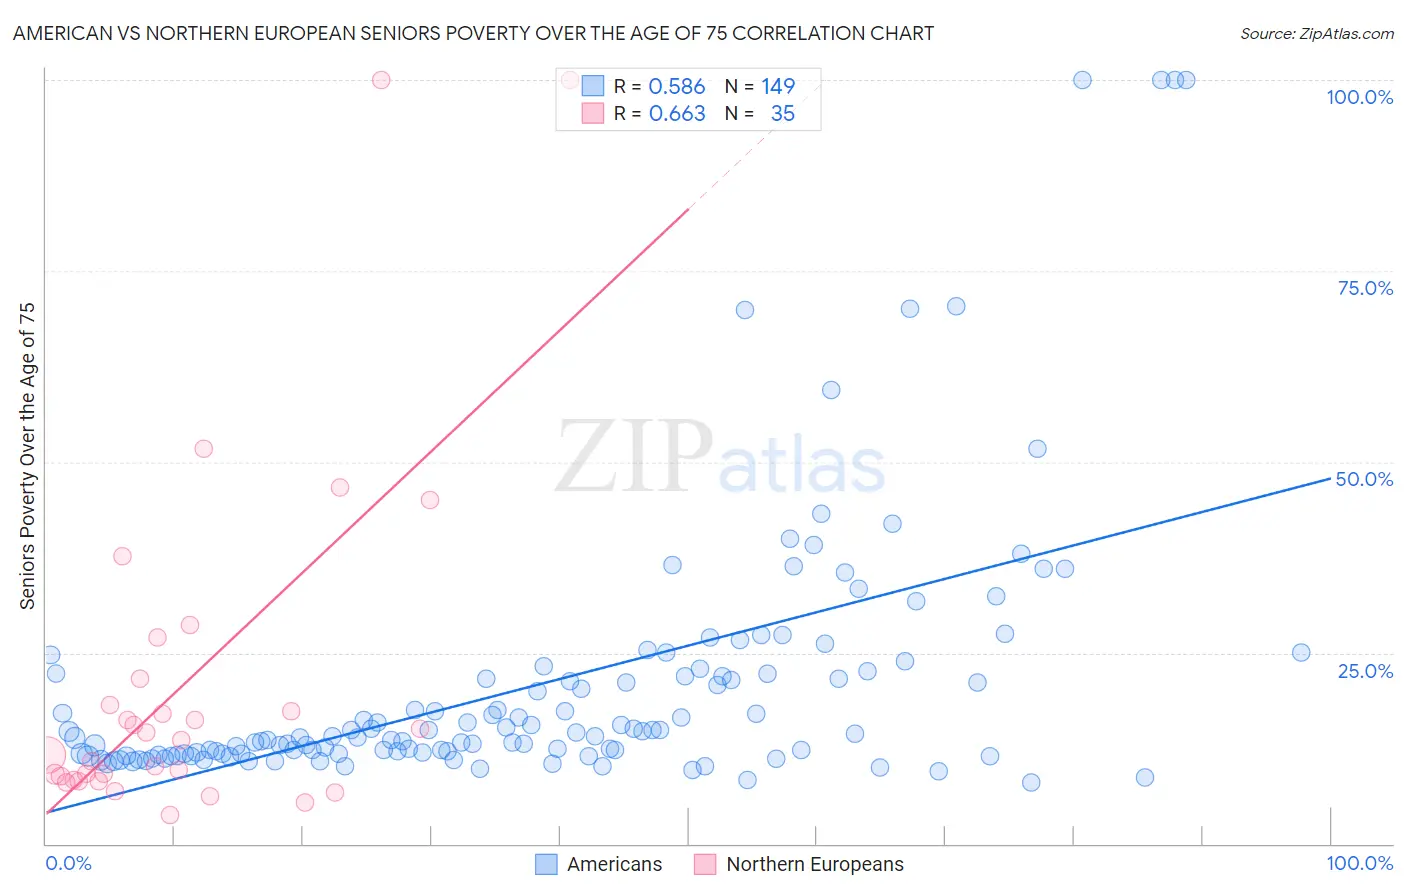 American vs Northern European Seniors Poverty Over the Age of 75